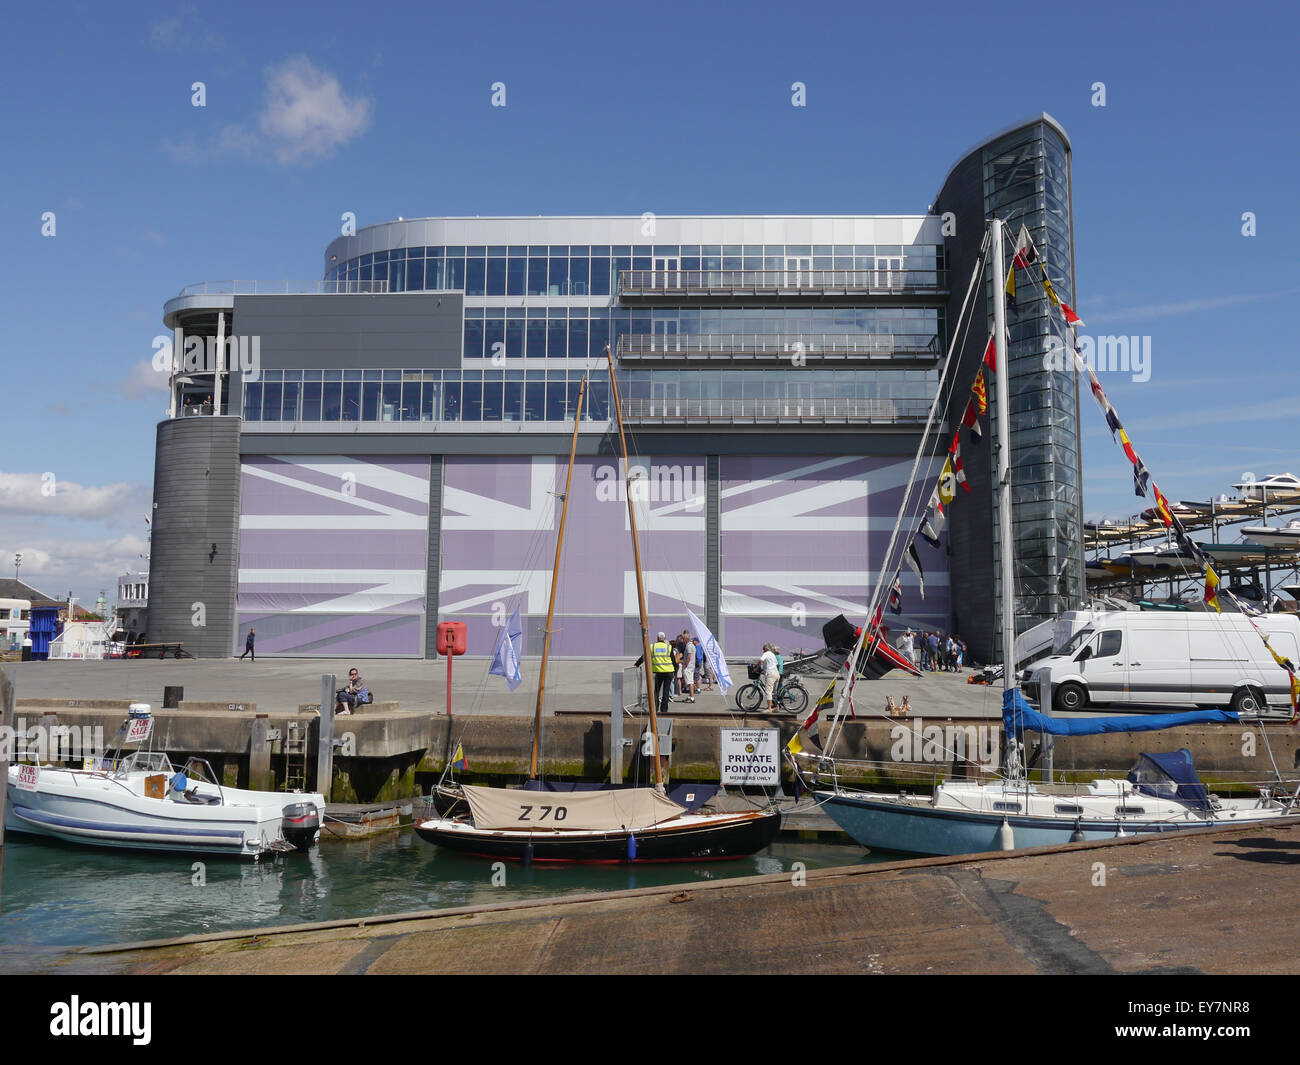 The Land Rover, Ben Ainslie Racing HQ, the base for the BAR team during their bid for the Americas Cup. Stock Photo